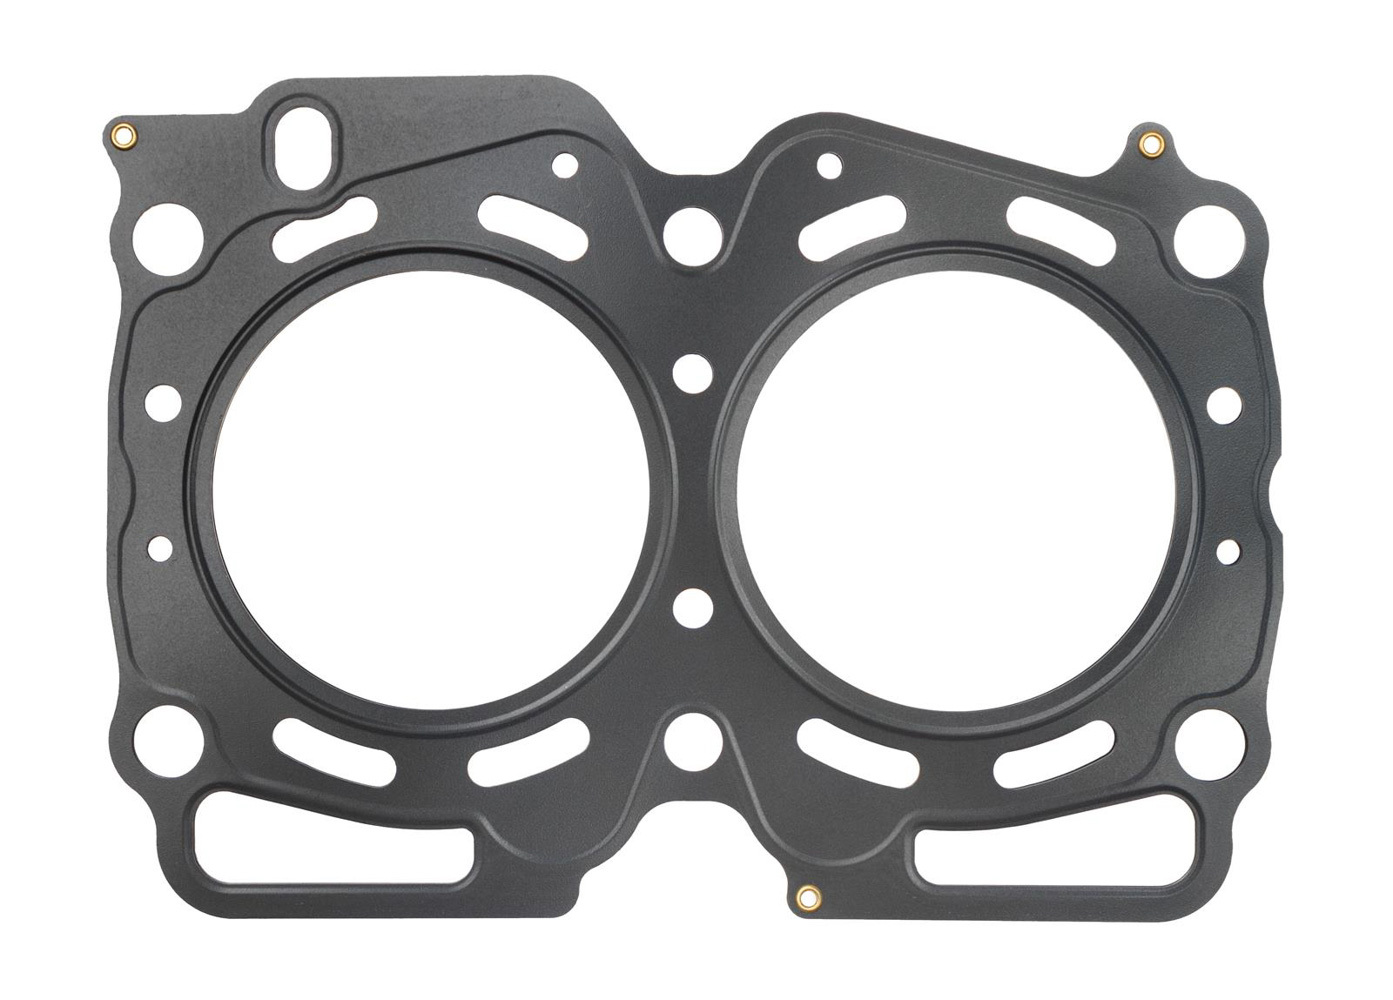 SCE Gaskets M338002GS - Cylinder Head Gasket, MLS Spartan, 94.00 mm Bore, 1.00 mm Compression Thickness, Multi-Layer Steel, Subaru 4-Cylinder, Each